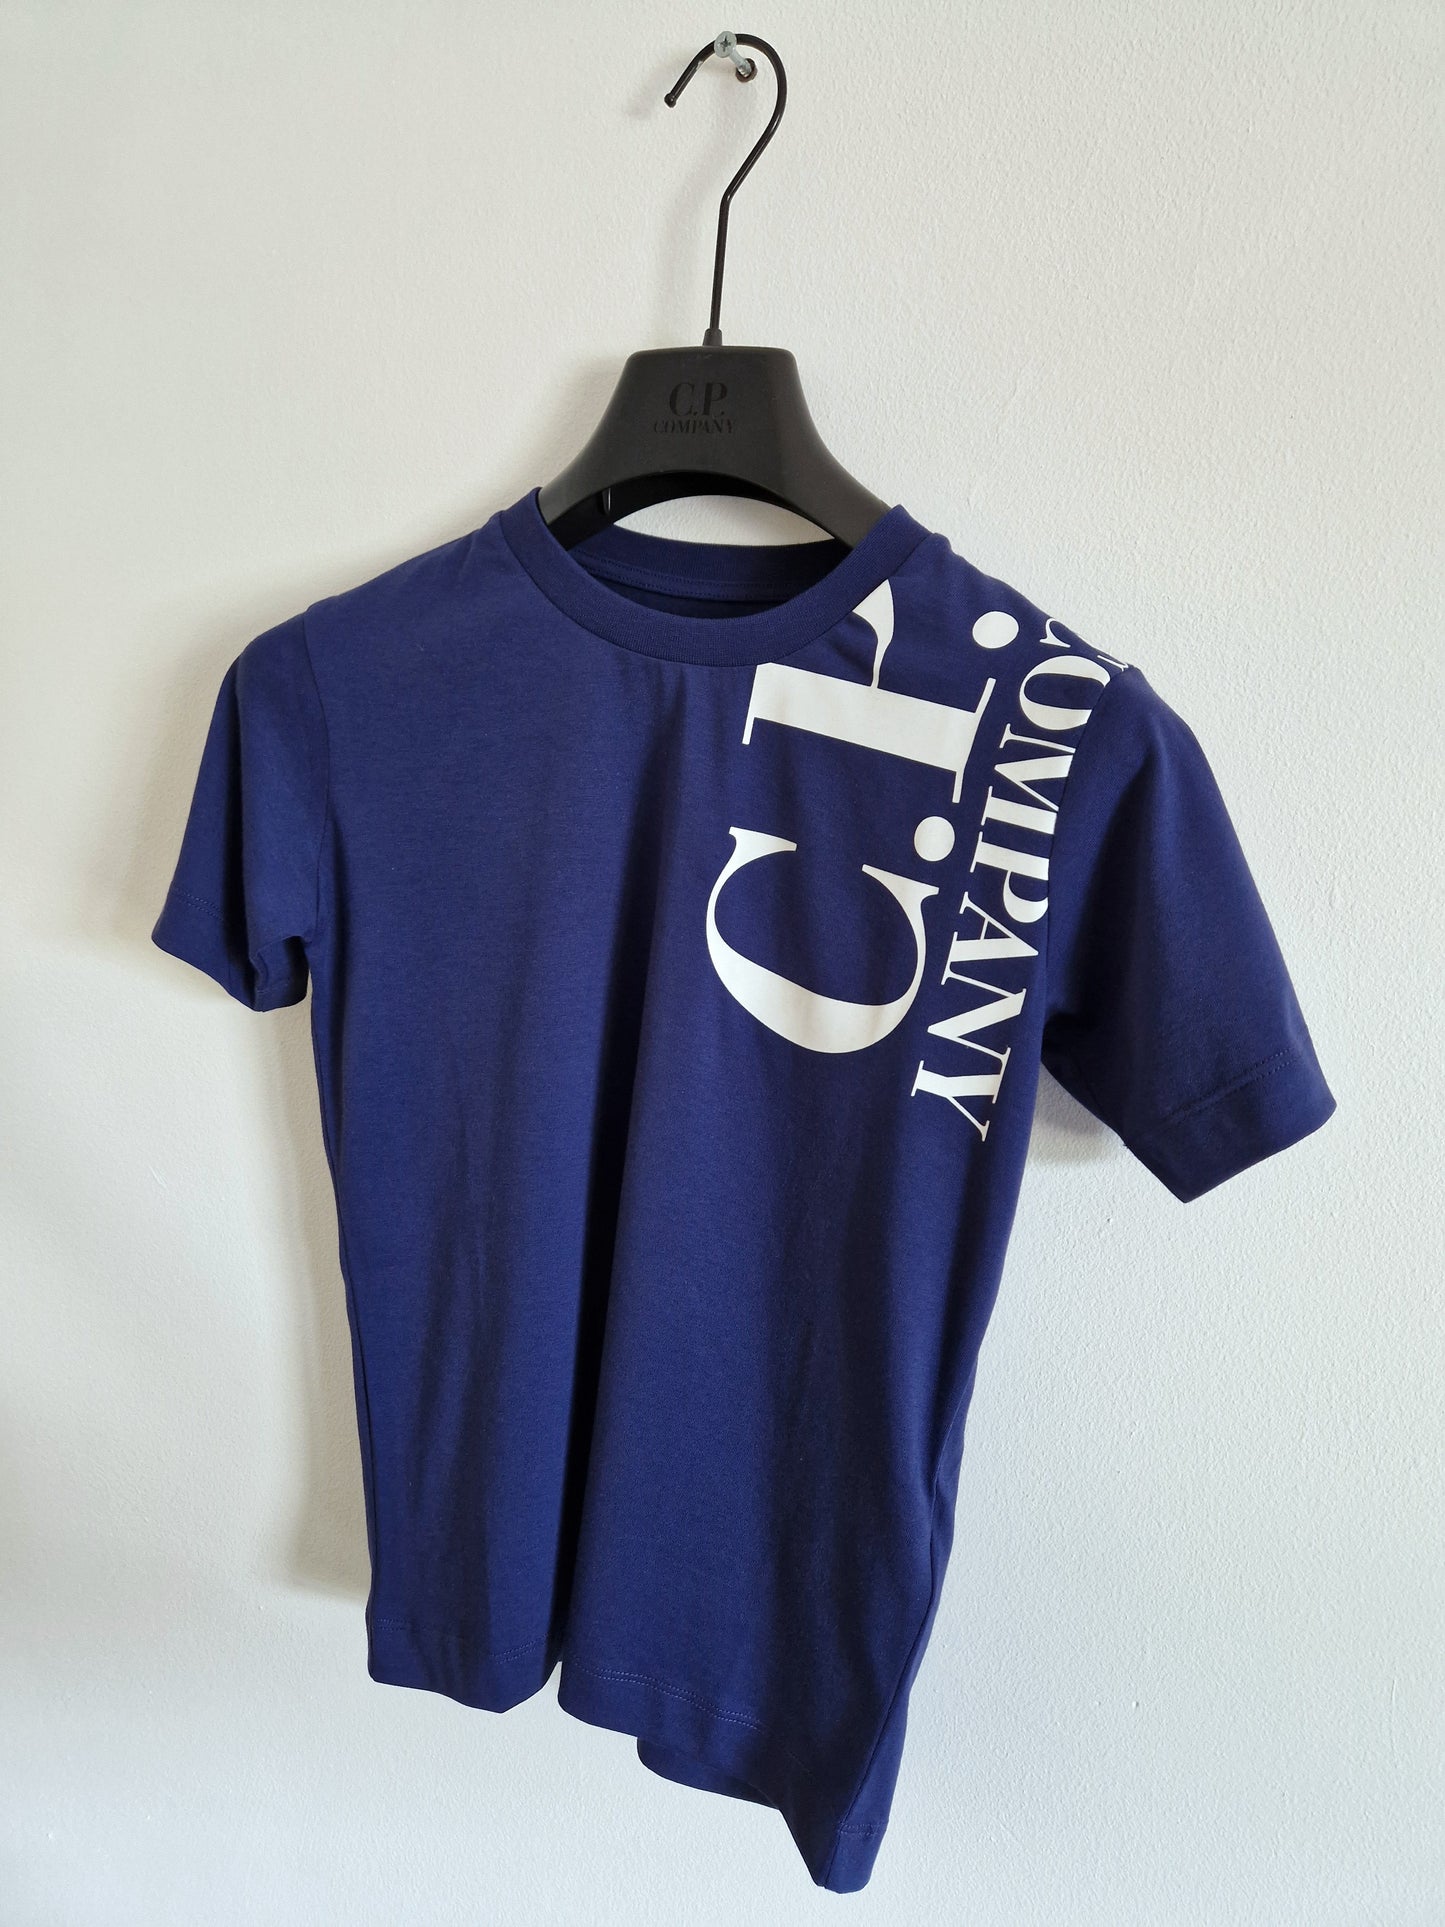 C.P. Company Junior Large Spell Out T-Shirt - Royal Blue